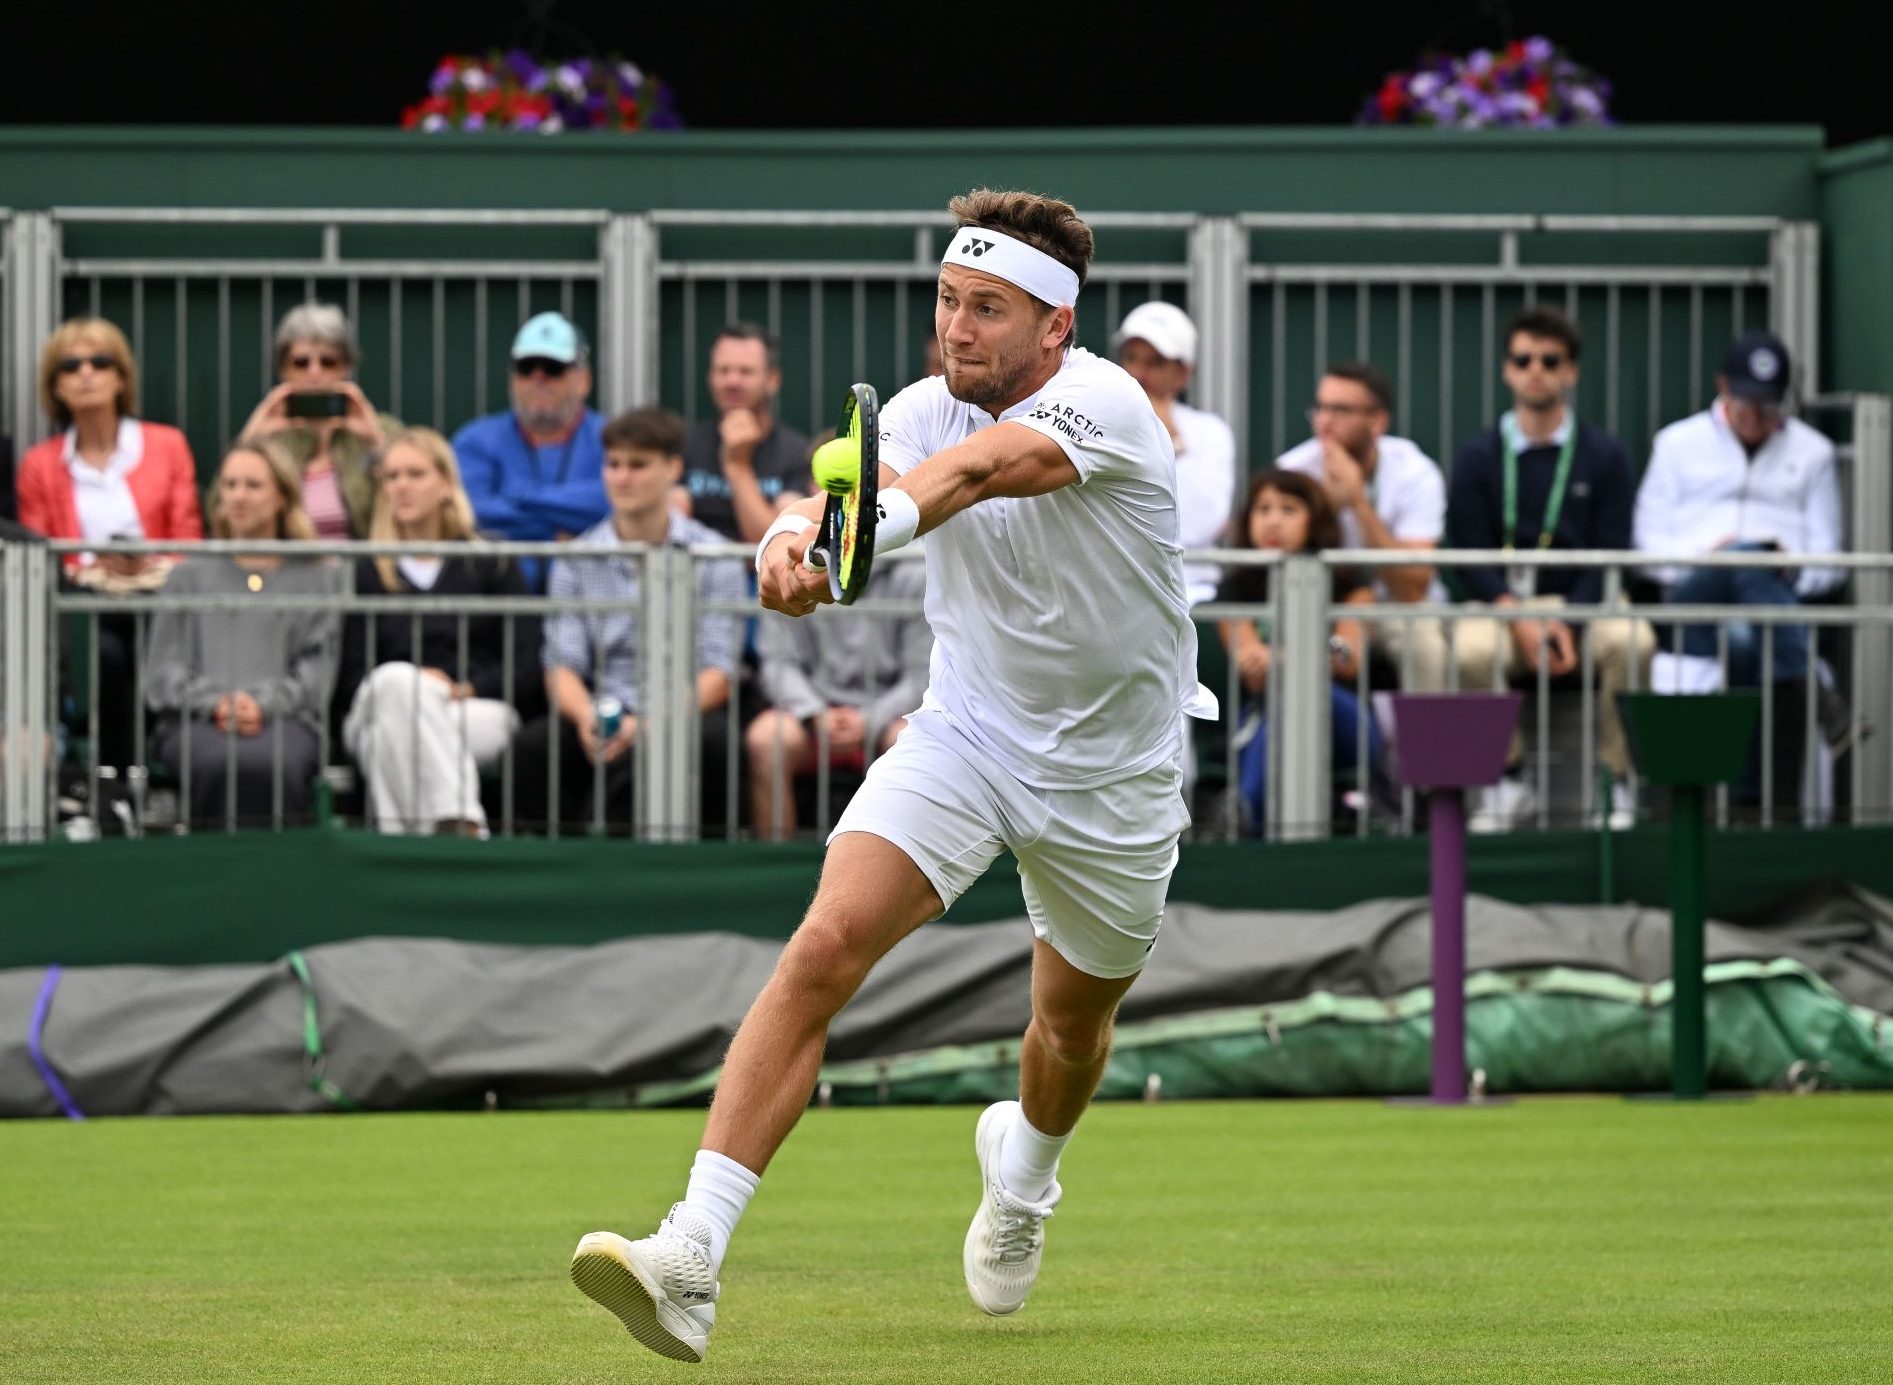 Wimbledon 2023 Seeds: A look on how are the new players doing so far